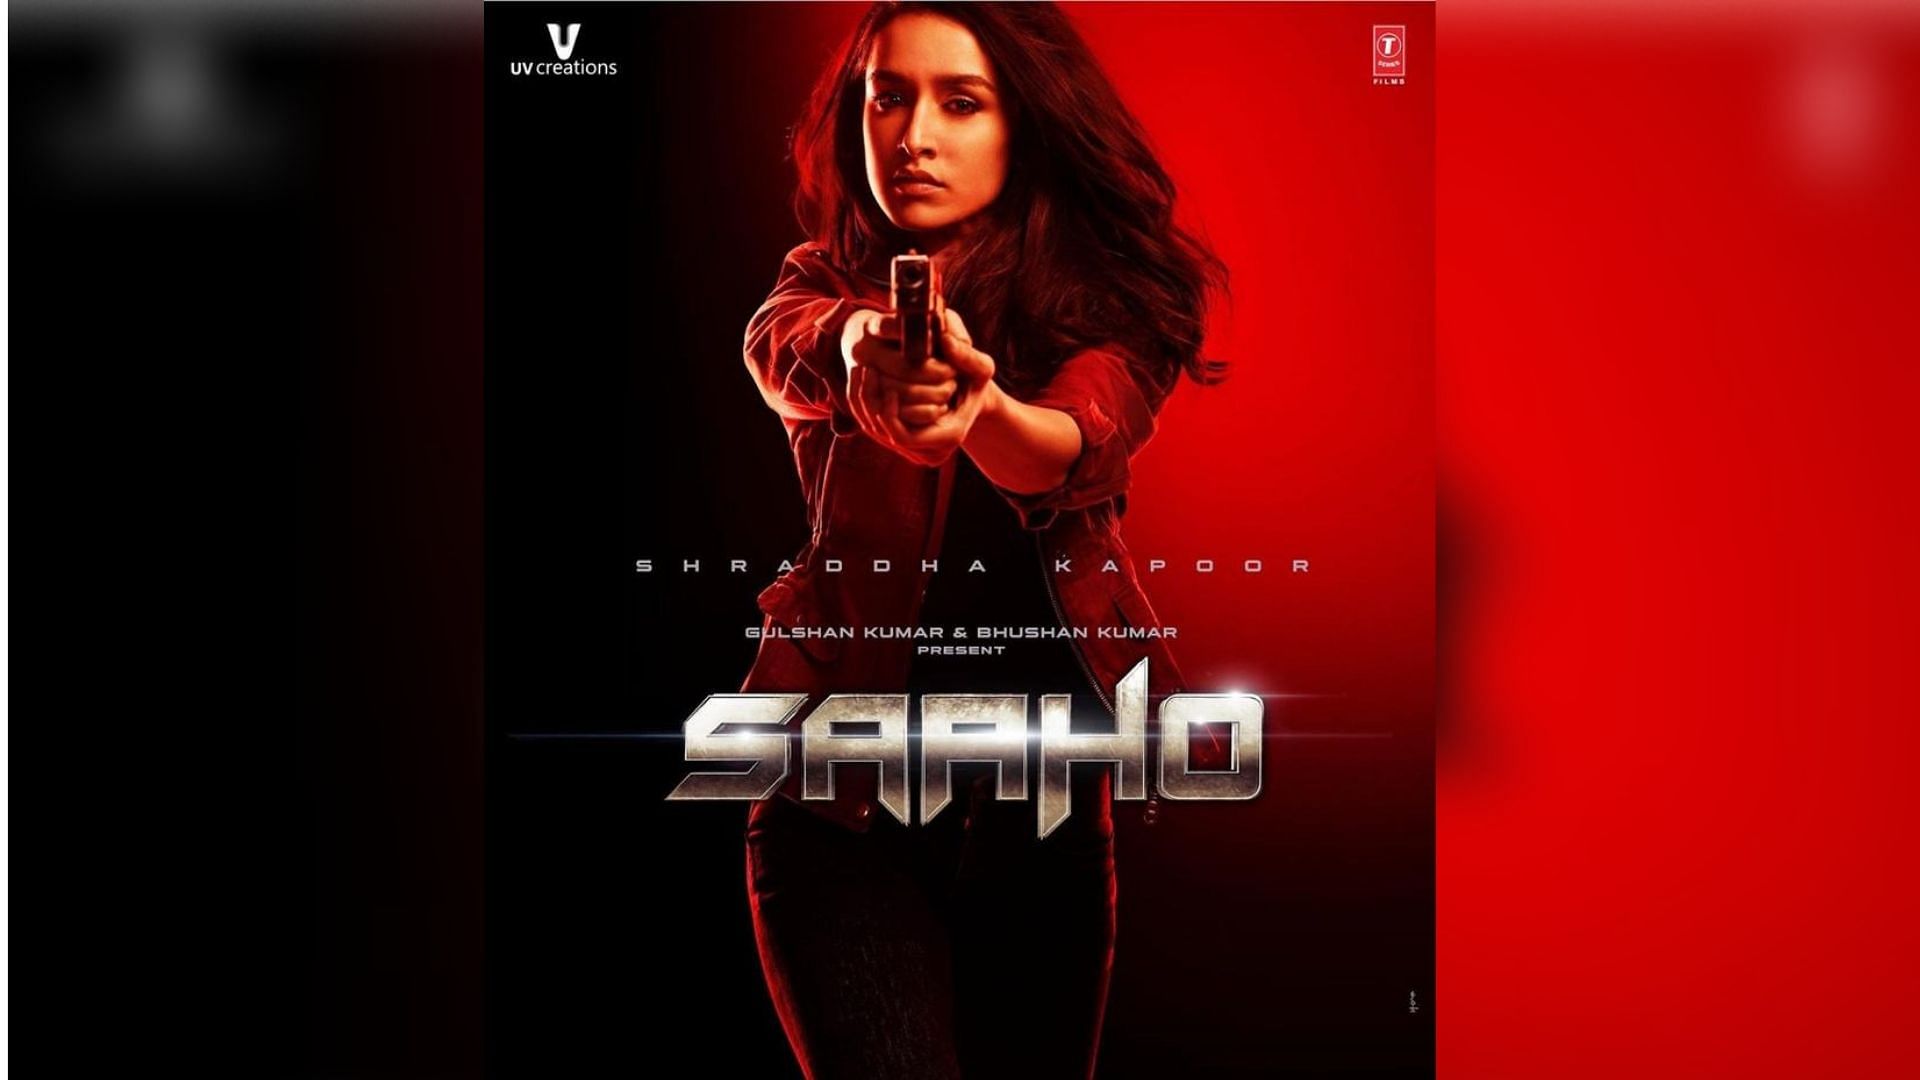 Shraddha Kapoor in a poster for Saaho.